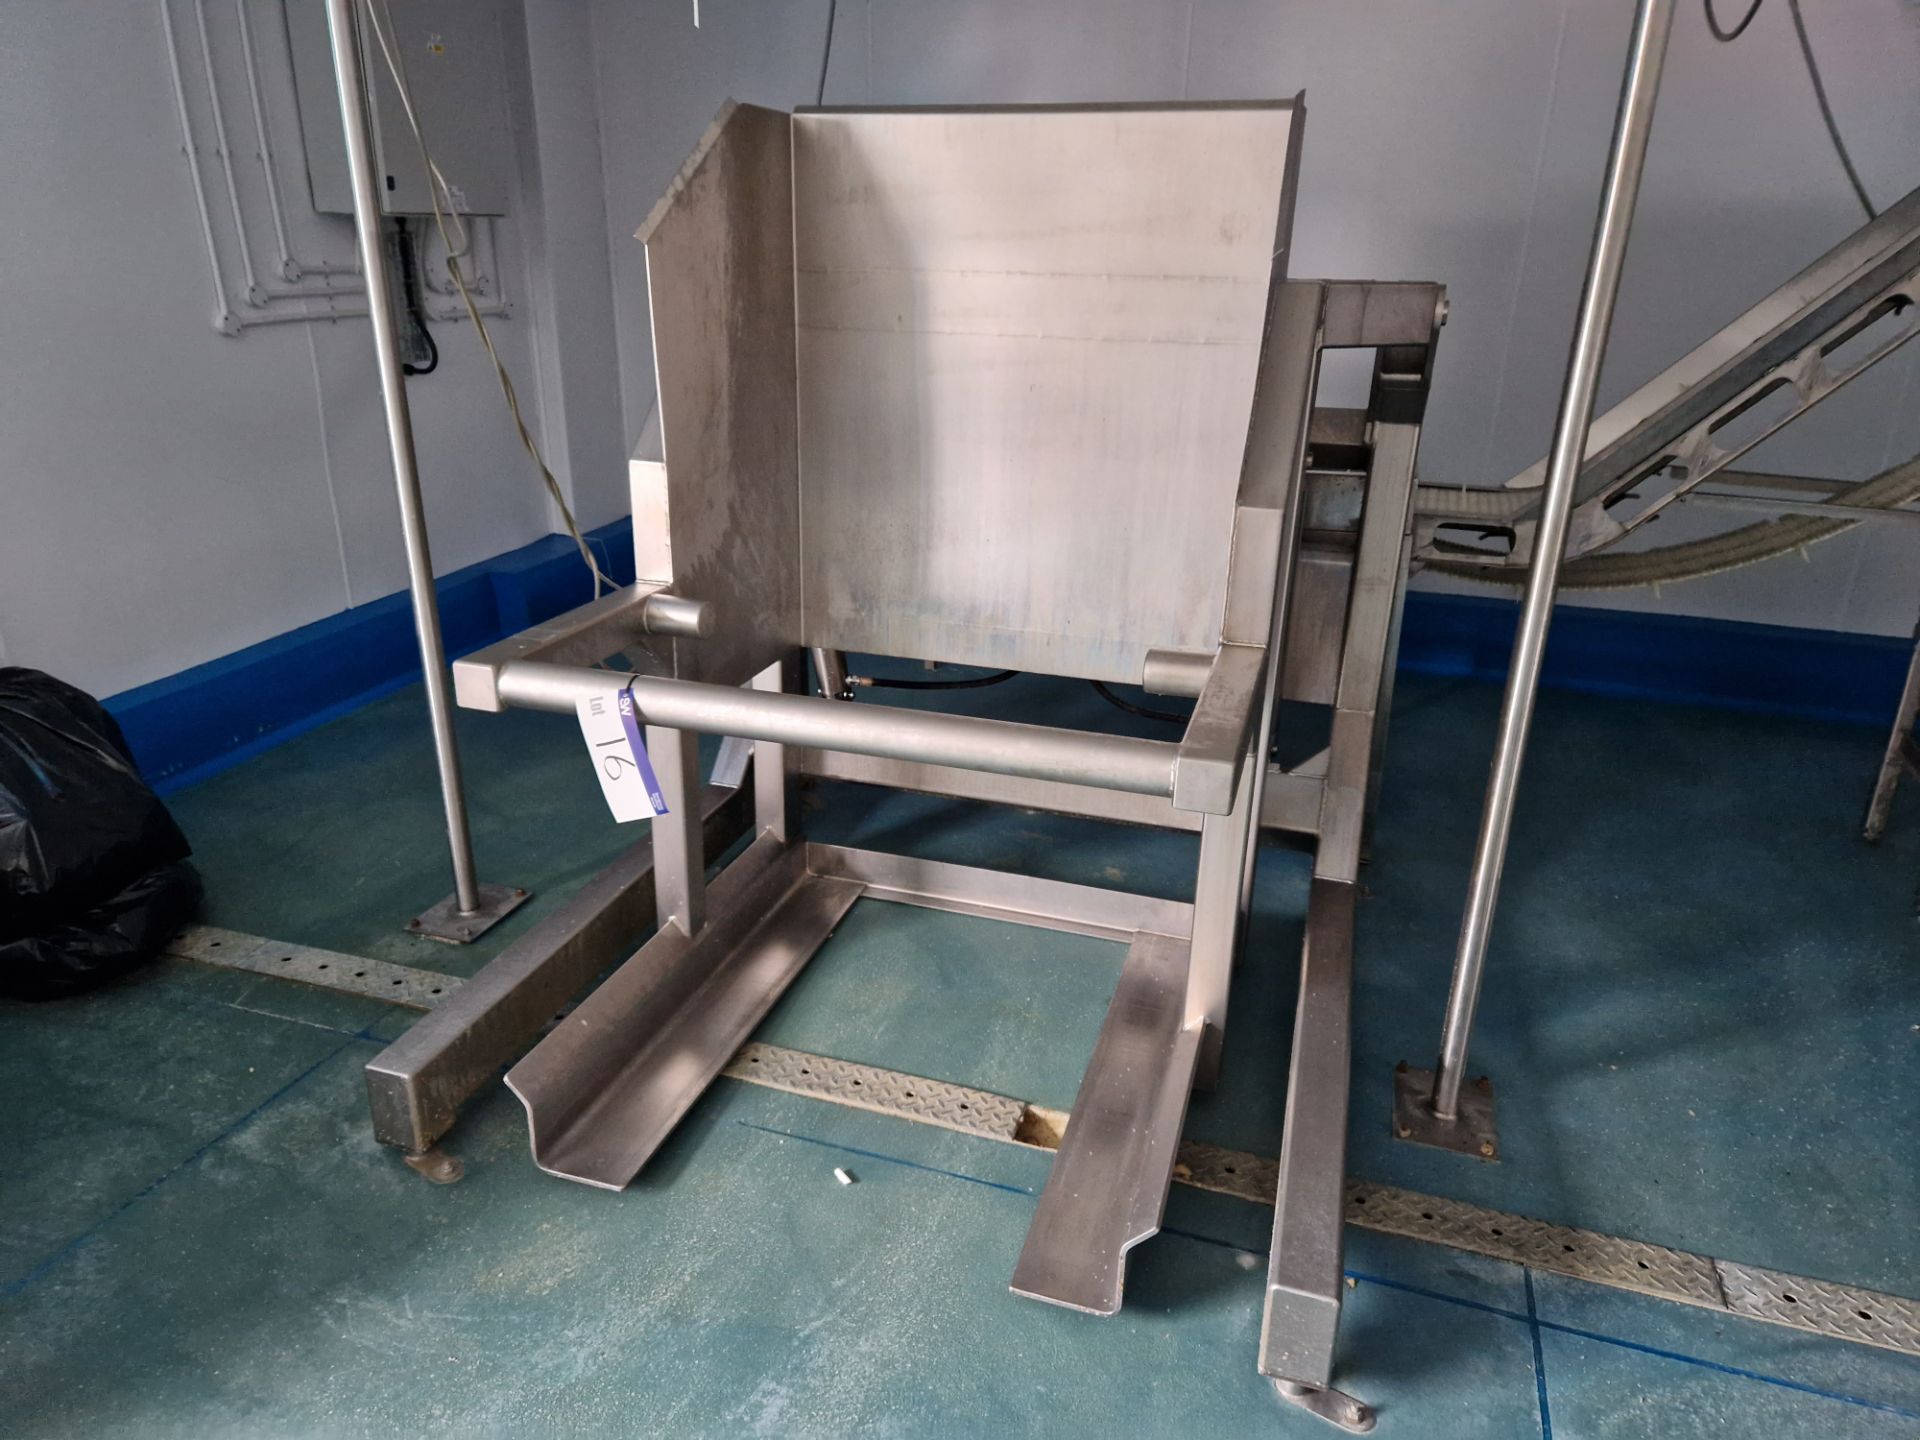 Syspal Model 4TS-1009 Stainless Steel Bin Lifter, serial no. K4676, year of manufacture 2014, SWL